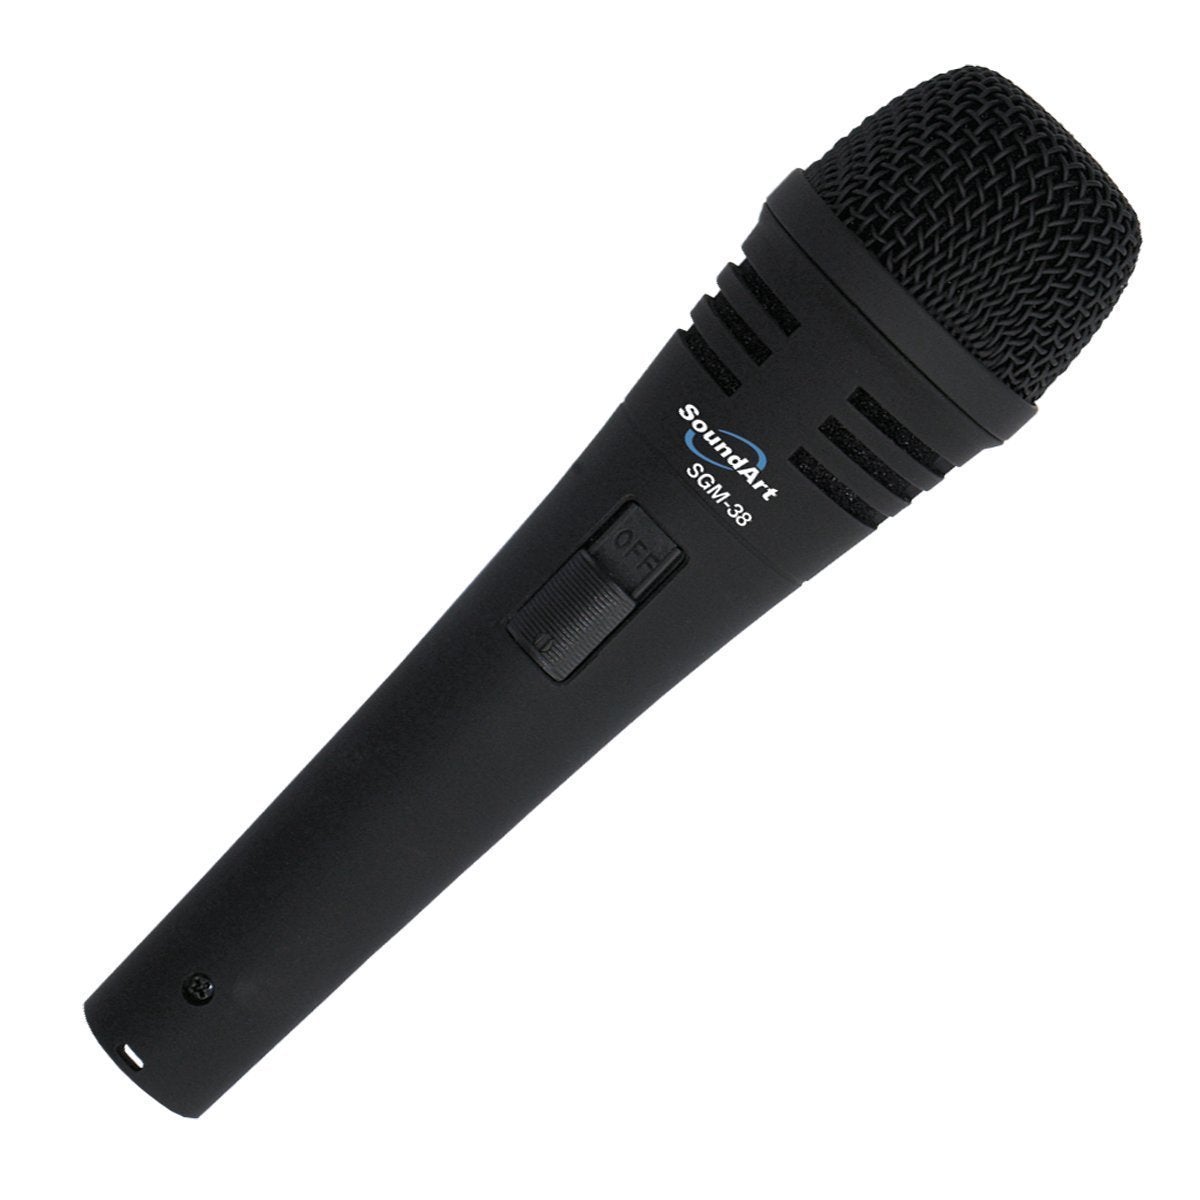 SoundArt SGM-38 Hand-Held Dynamic Microphone with Protective Bag